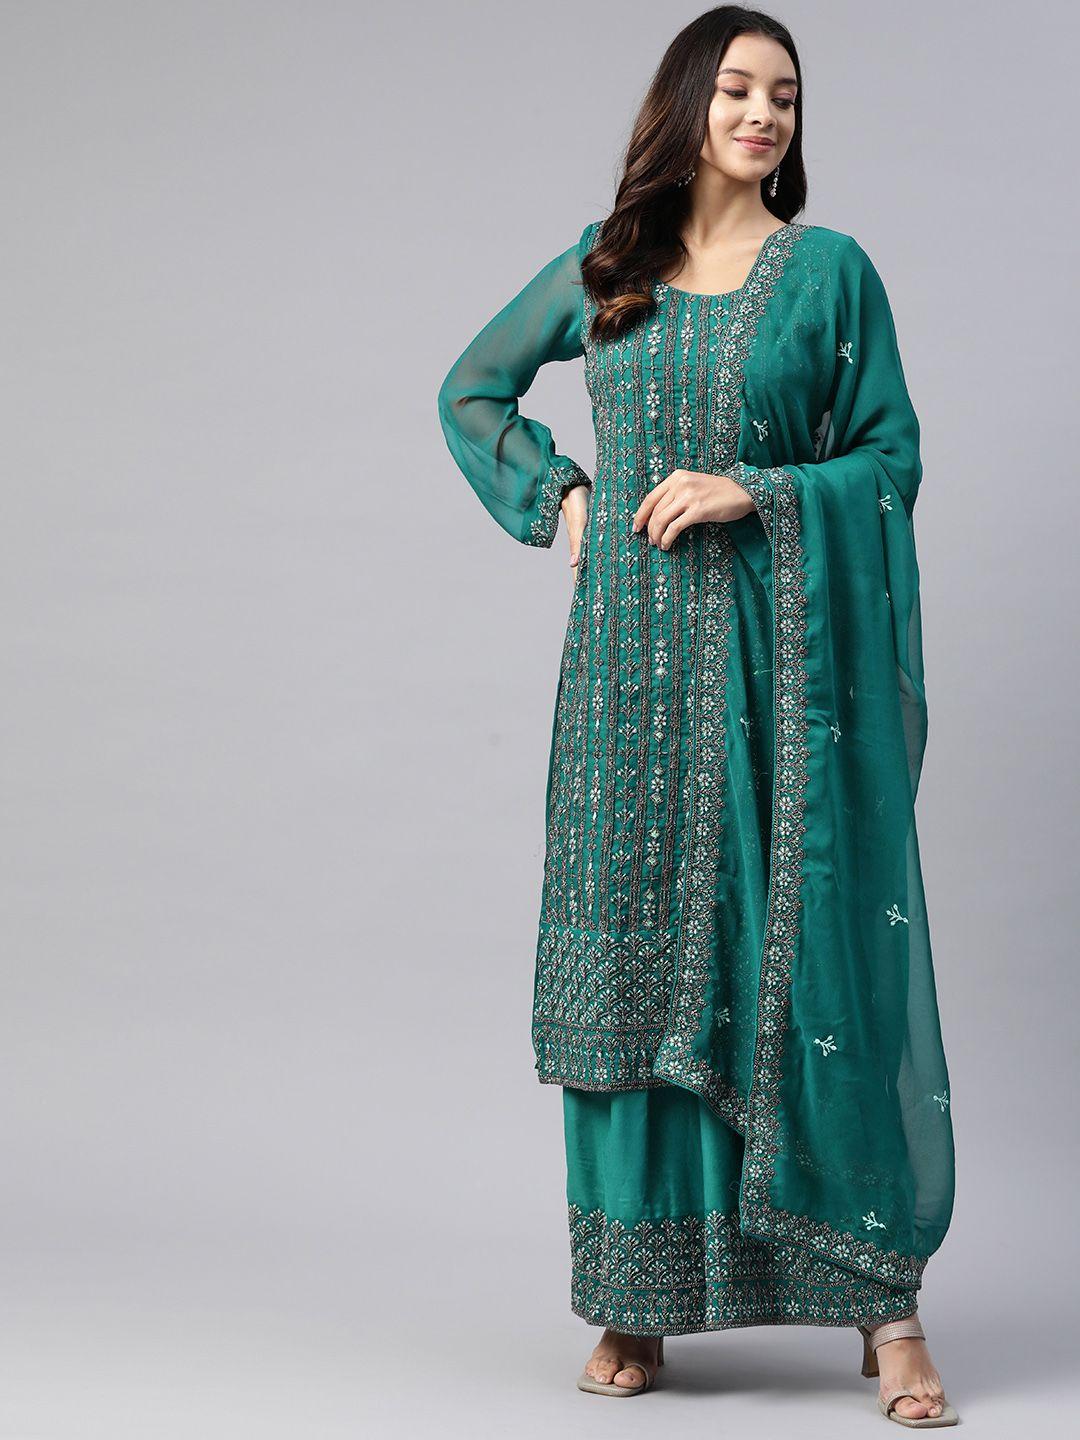 readiprint fashions embroidered semi-stitched dress material